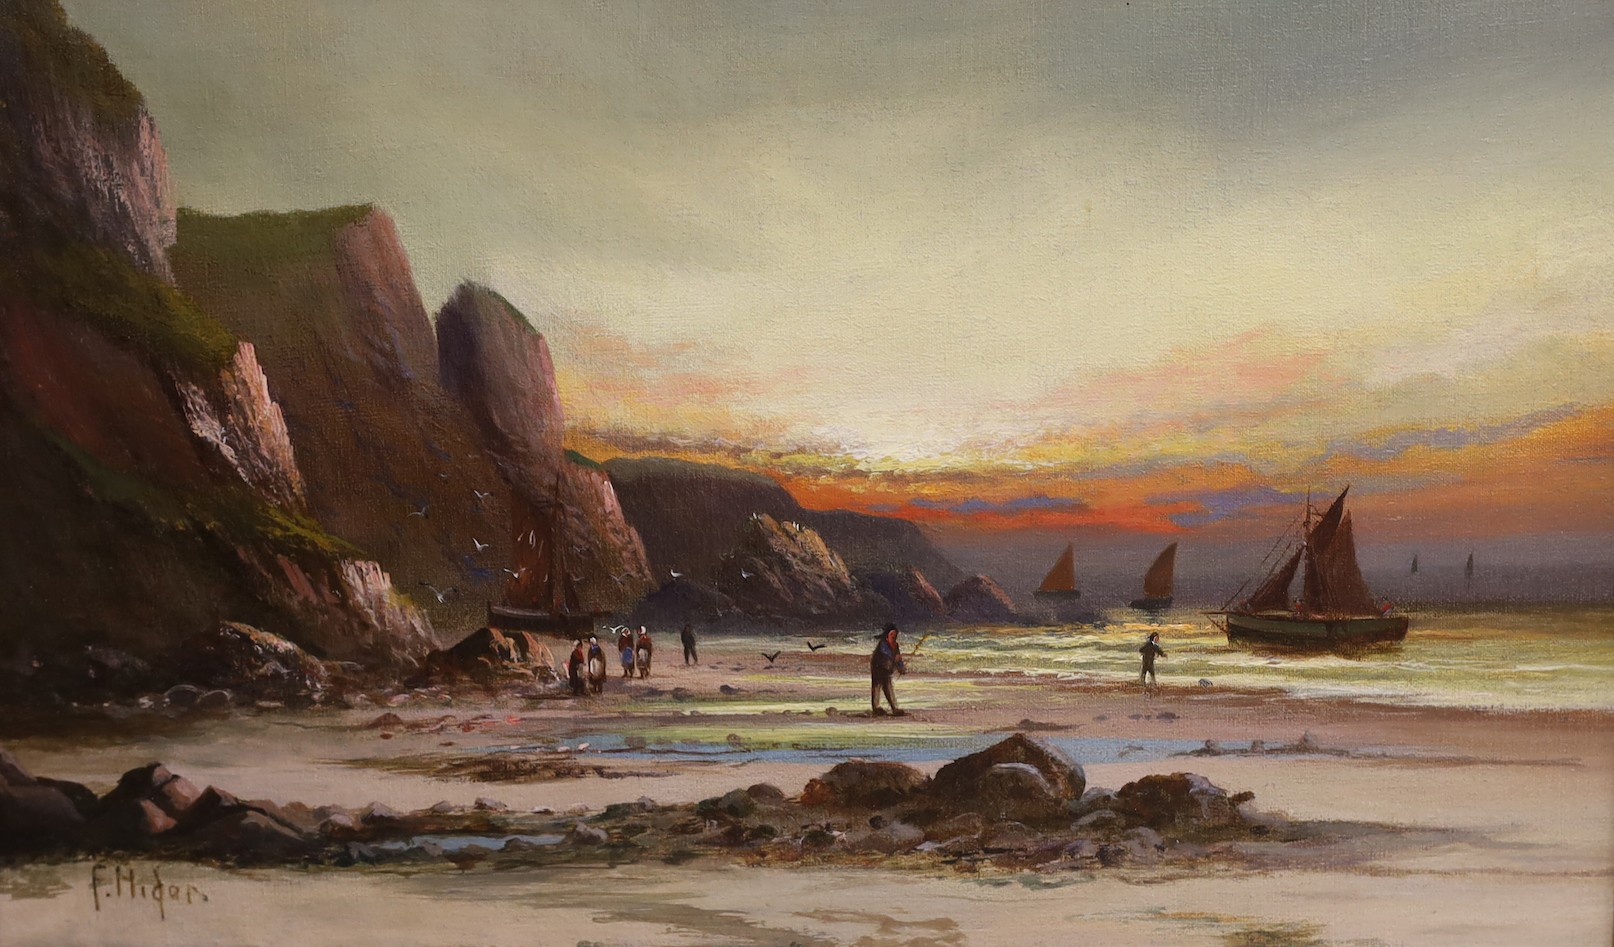 Frank Hyder (1861-1933), oil on canvas, 'Coming in with the tide', c.1900, signed, 29 x 49cm